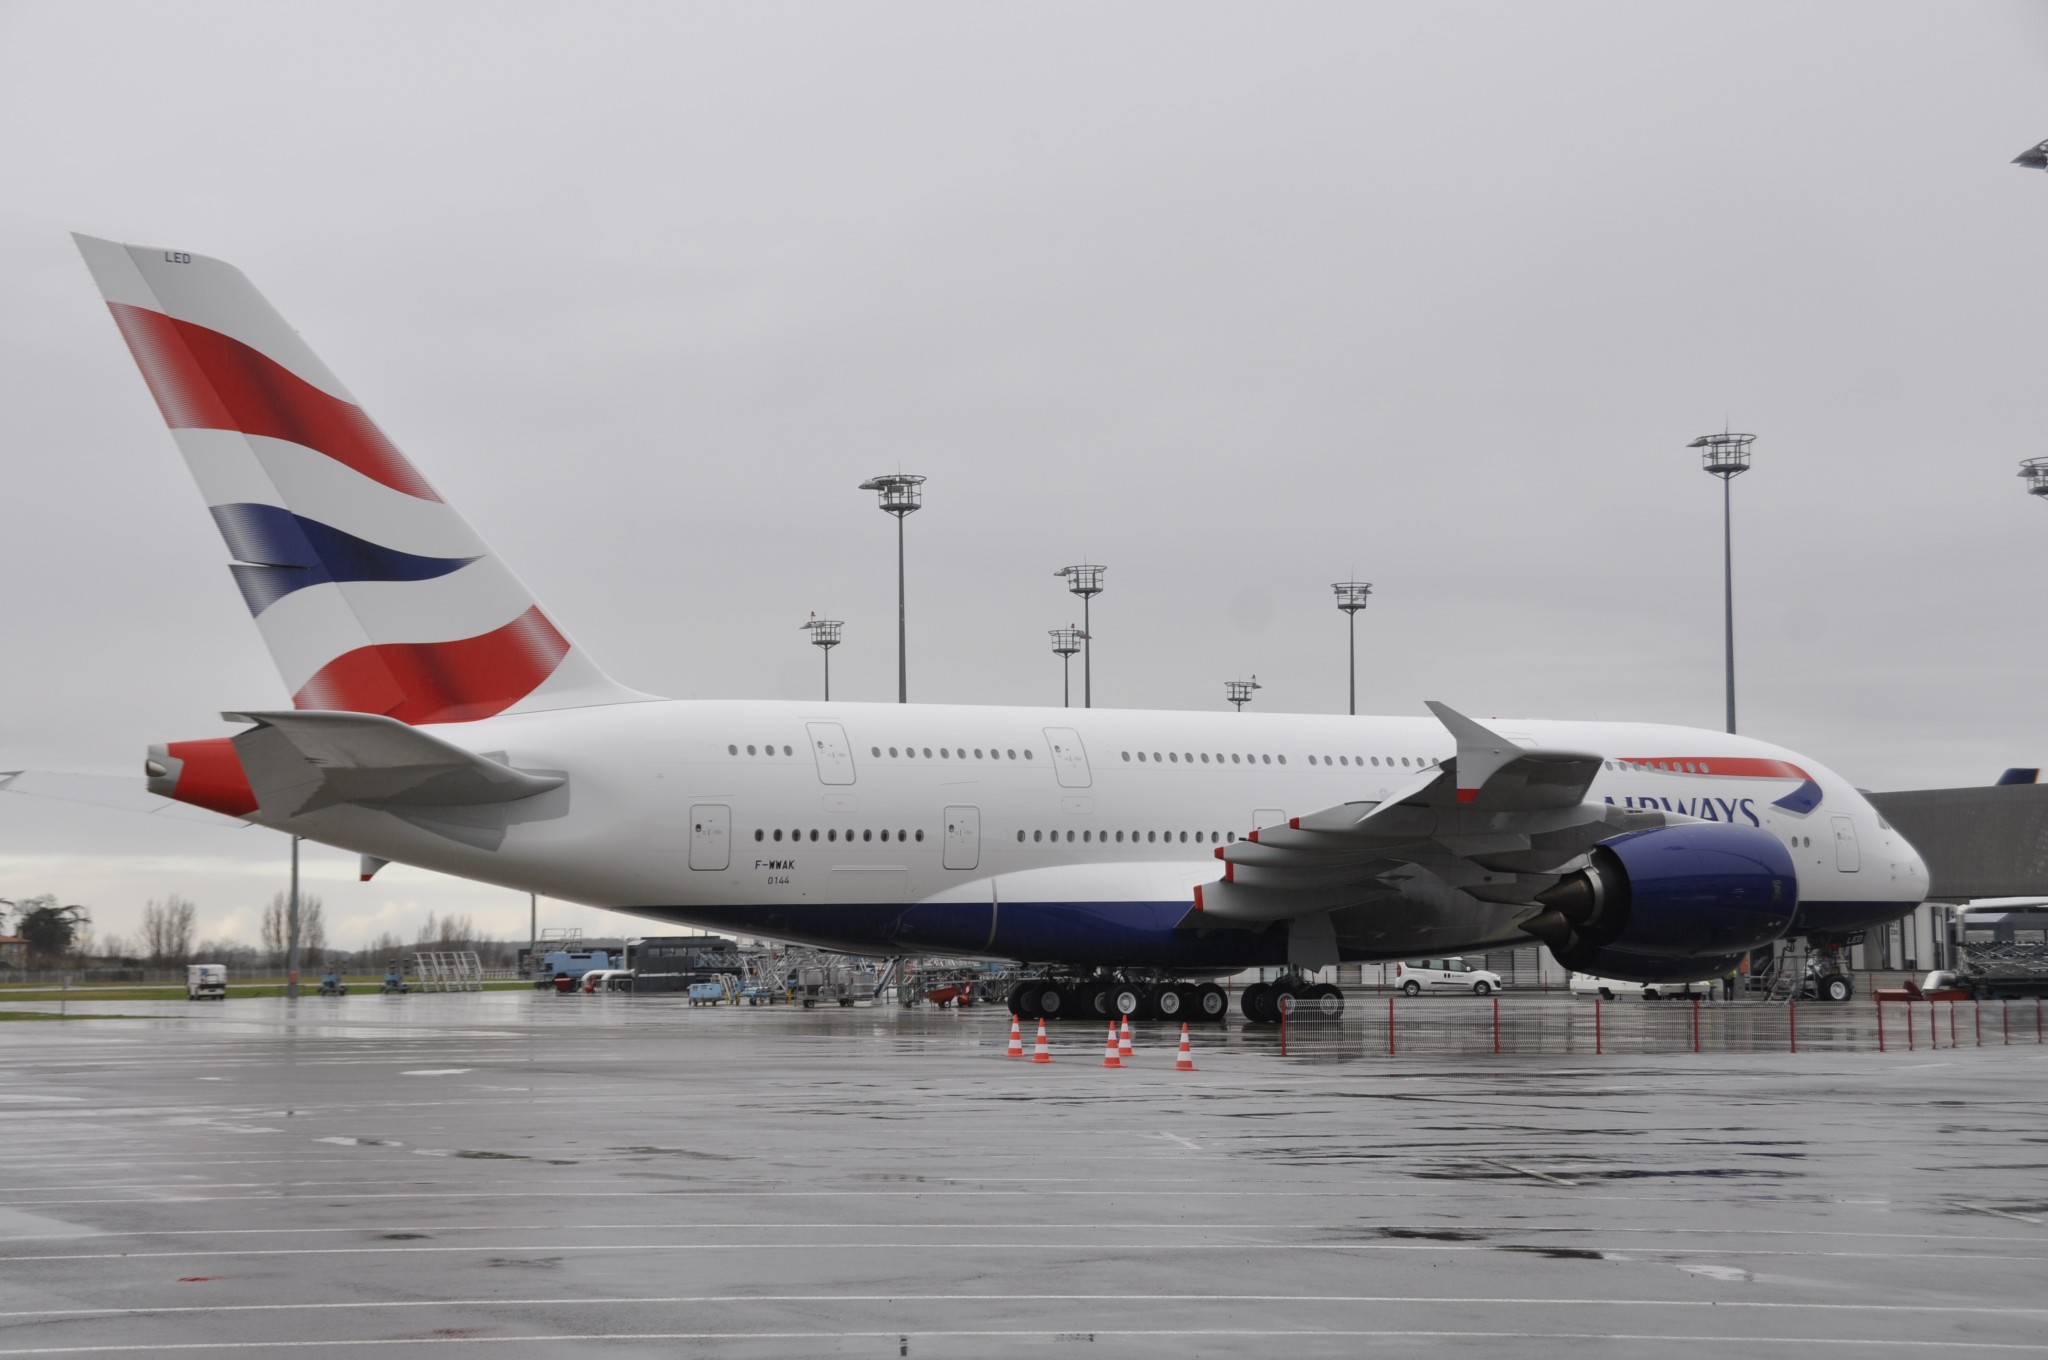 British Airways takes off with China Eastern Airlines